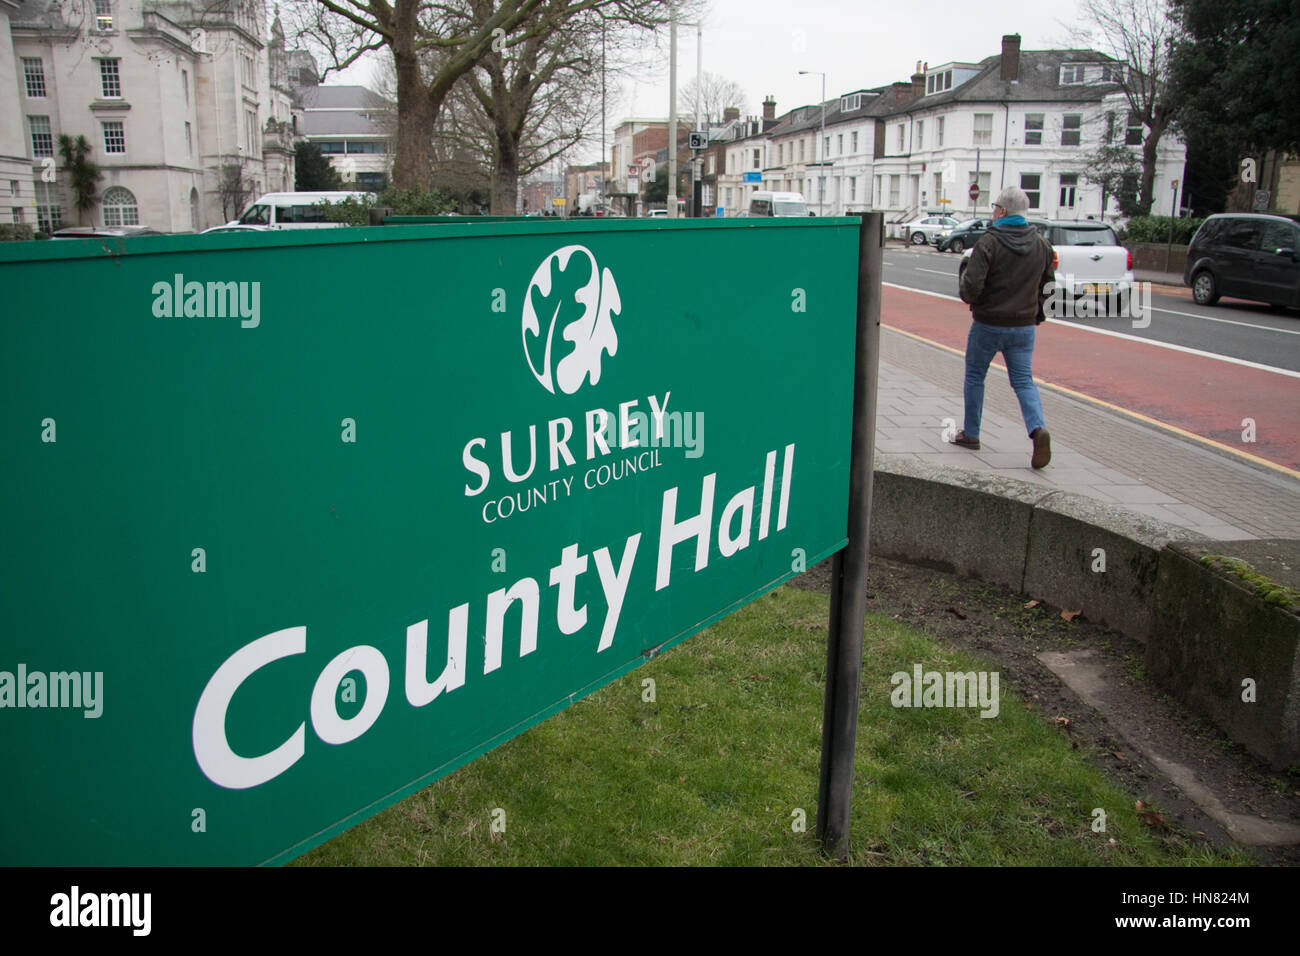 Kingston upon Thames, UK. 9th Feb, 2017. Conservative controlled Surrey County Council in Kingston upon Thames has been accused by Labour leader Jeremy Corbyn of a sweetheart deal with government ministers to raise the council tax rate by 15% in order to fund social care Credit: amer ghazzal/Alamy Live News Stock Photo